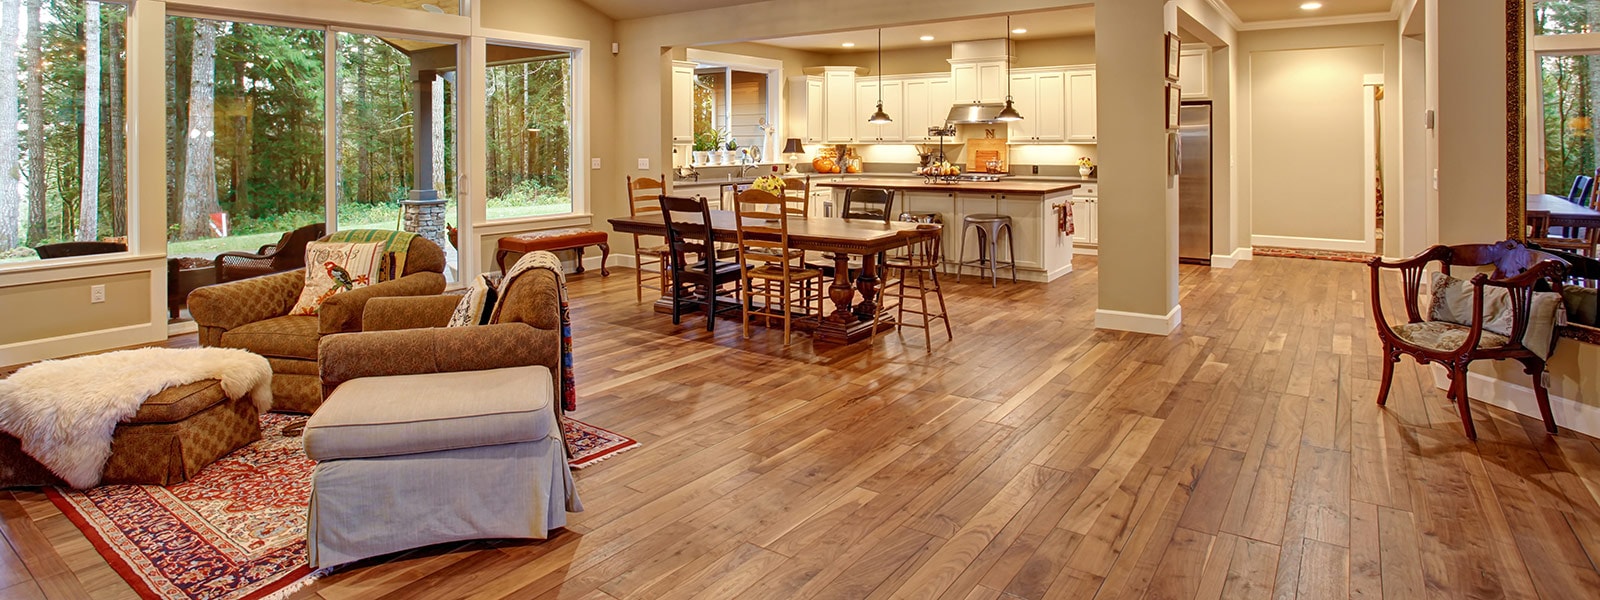 Beautiful hardwood floors for your home or business.